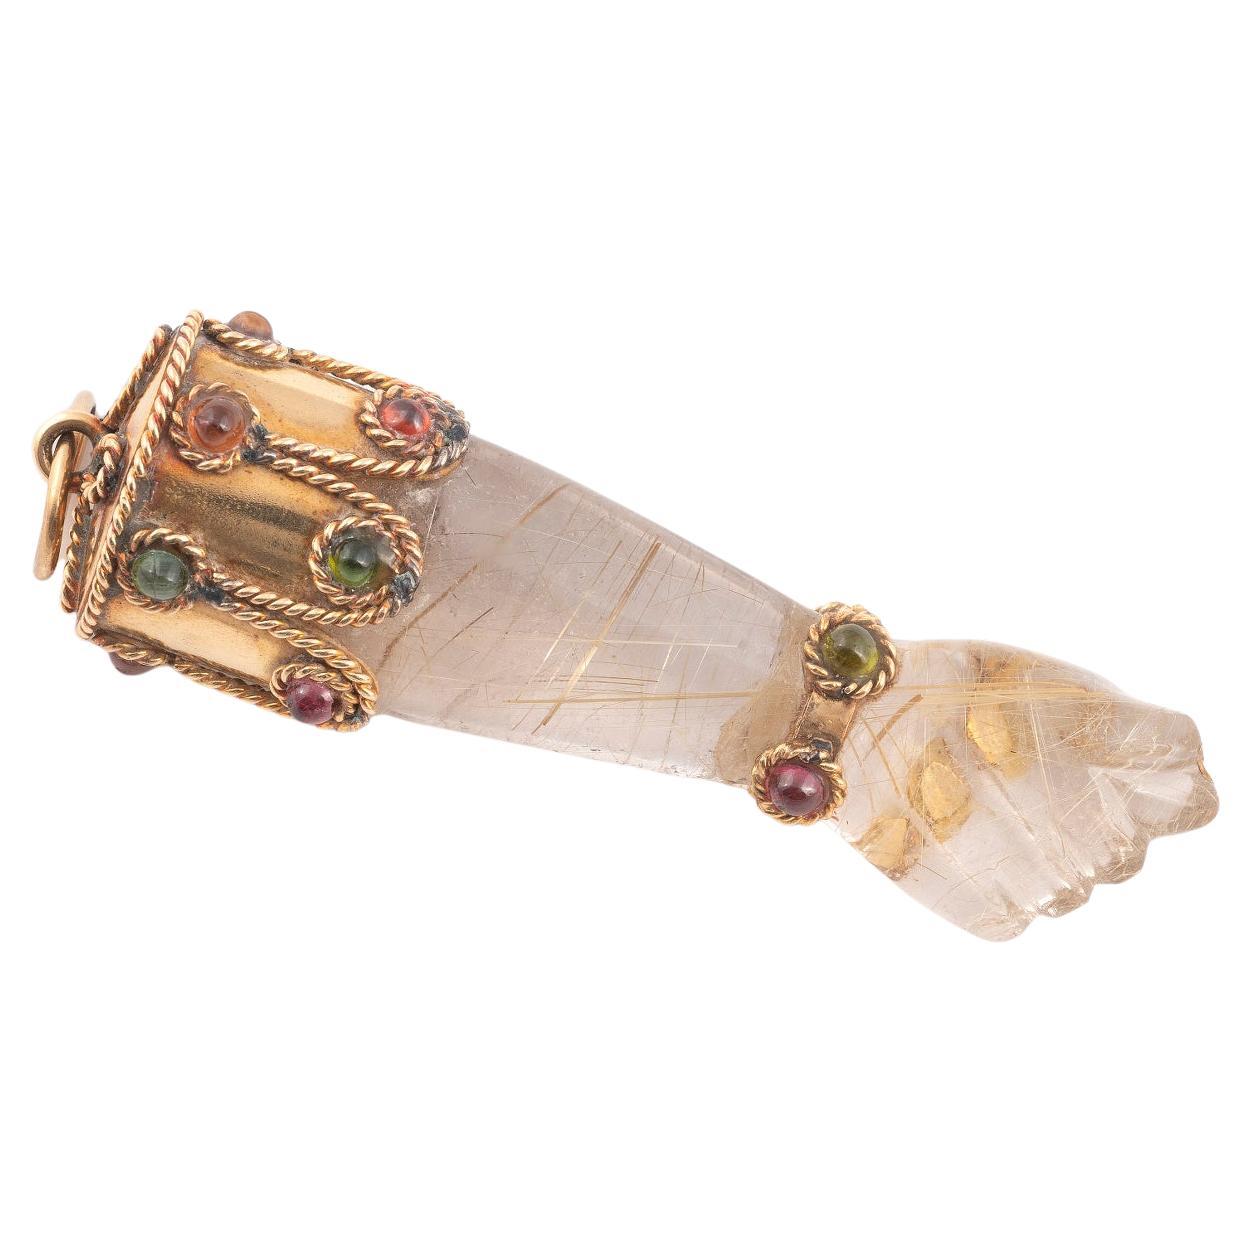 The rock crystal hand realistically modelled with the thumb between the first two fingers surmounted by a gold cap embellished with cabochon cut semi-precious stones, length 80mm including loop.
Weight: 33gr.
A higa jewel (sometimes known as a figa)